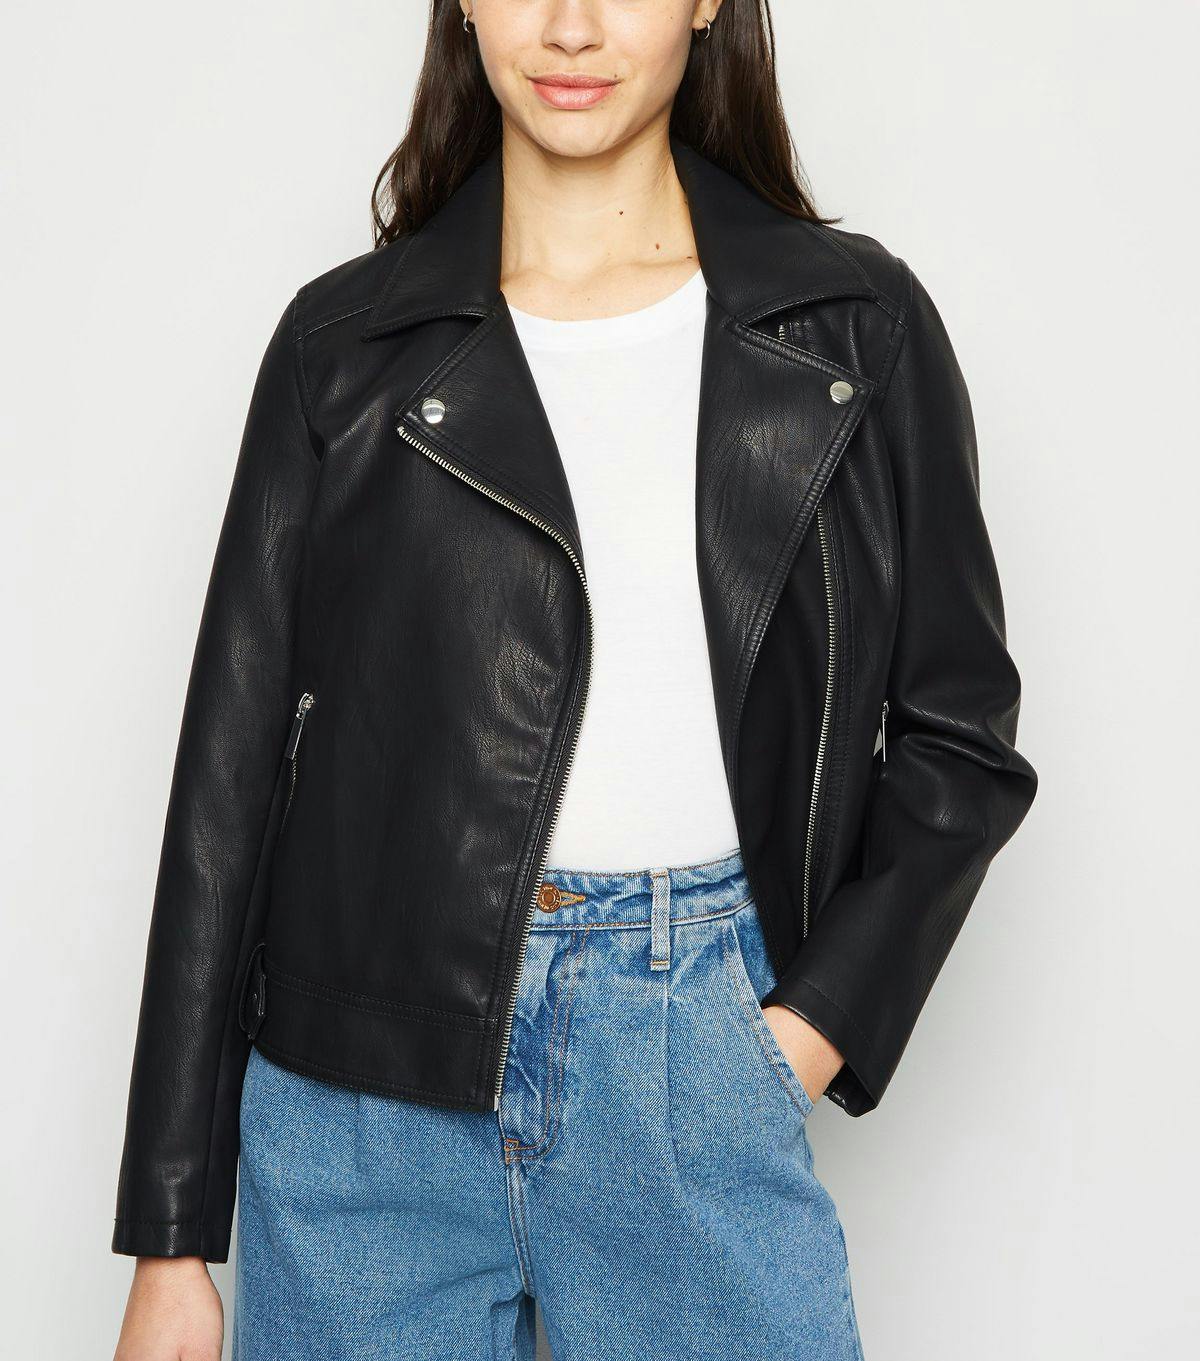 allplants | Our Favourite Vegan Leather Jackets